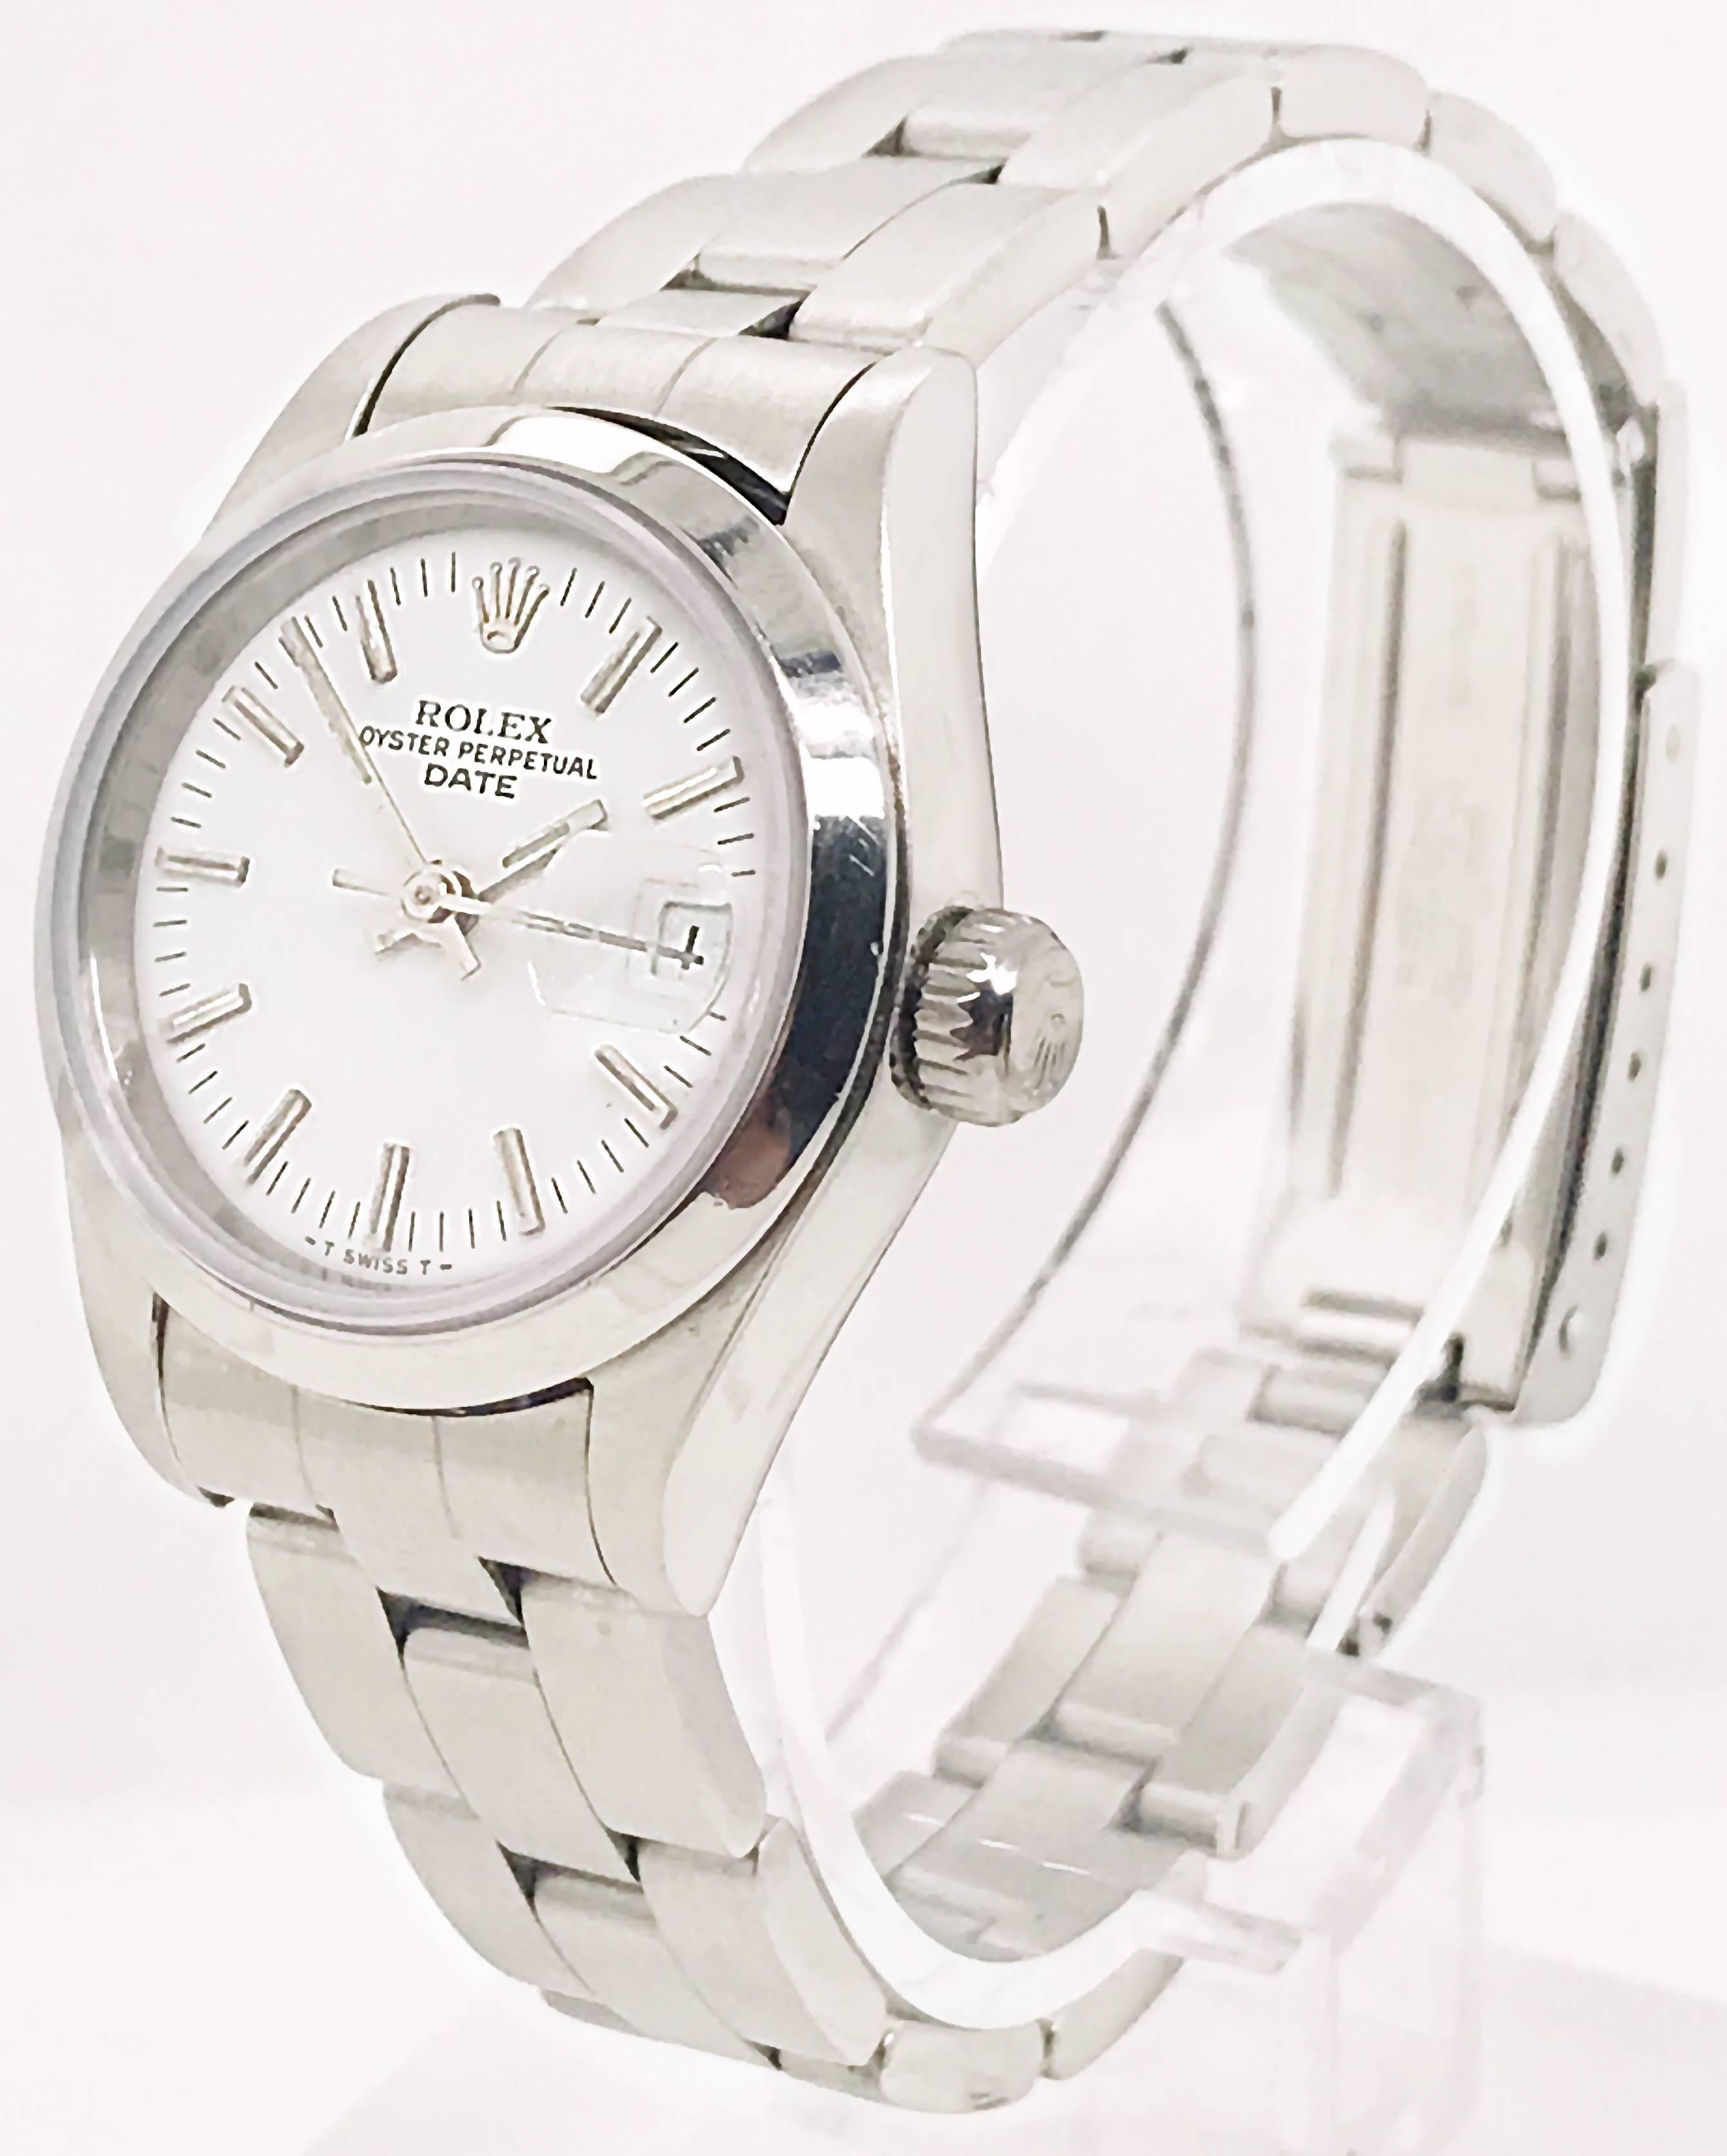 This lovely Rolex for ladies is crafted from stainless steel and features a white face for easy time recognition. Completed with an oyster bracelet with a smooth bezel this circa 1996 ladies Rolex is a classic design. 

This timepiece was recently